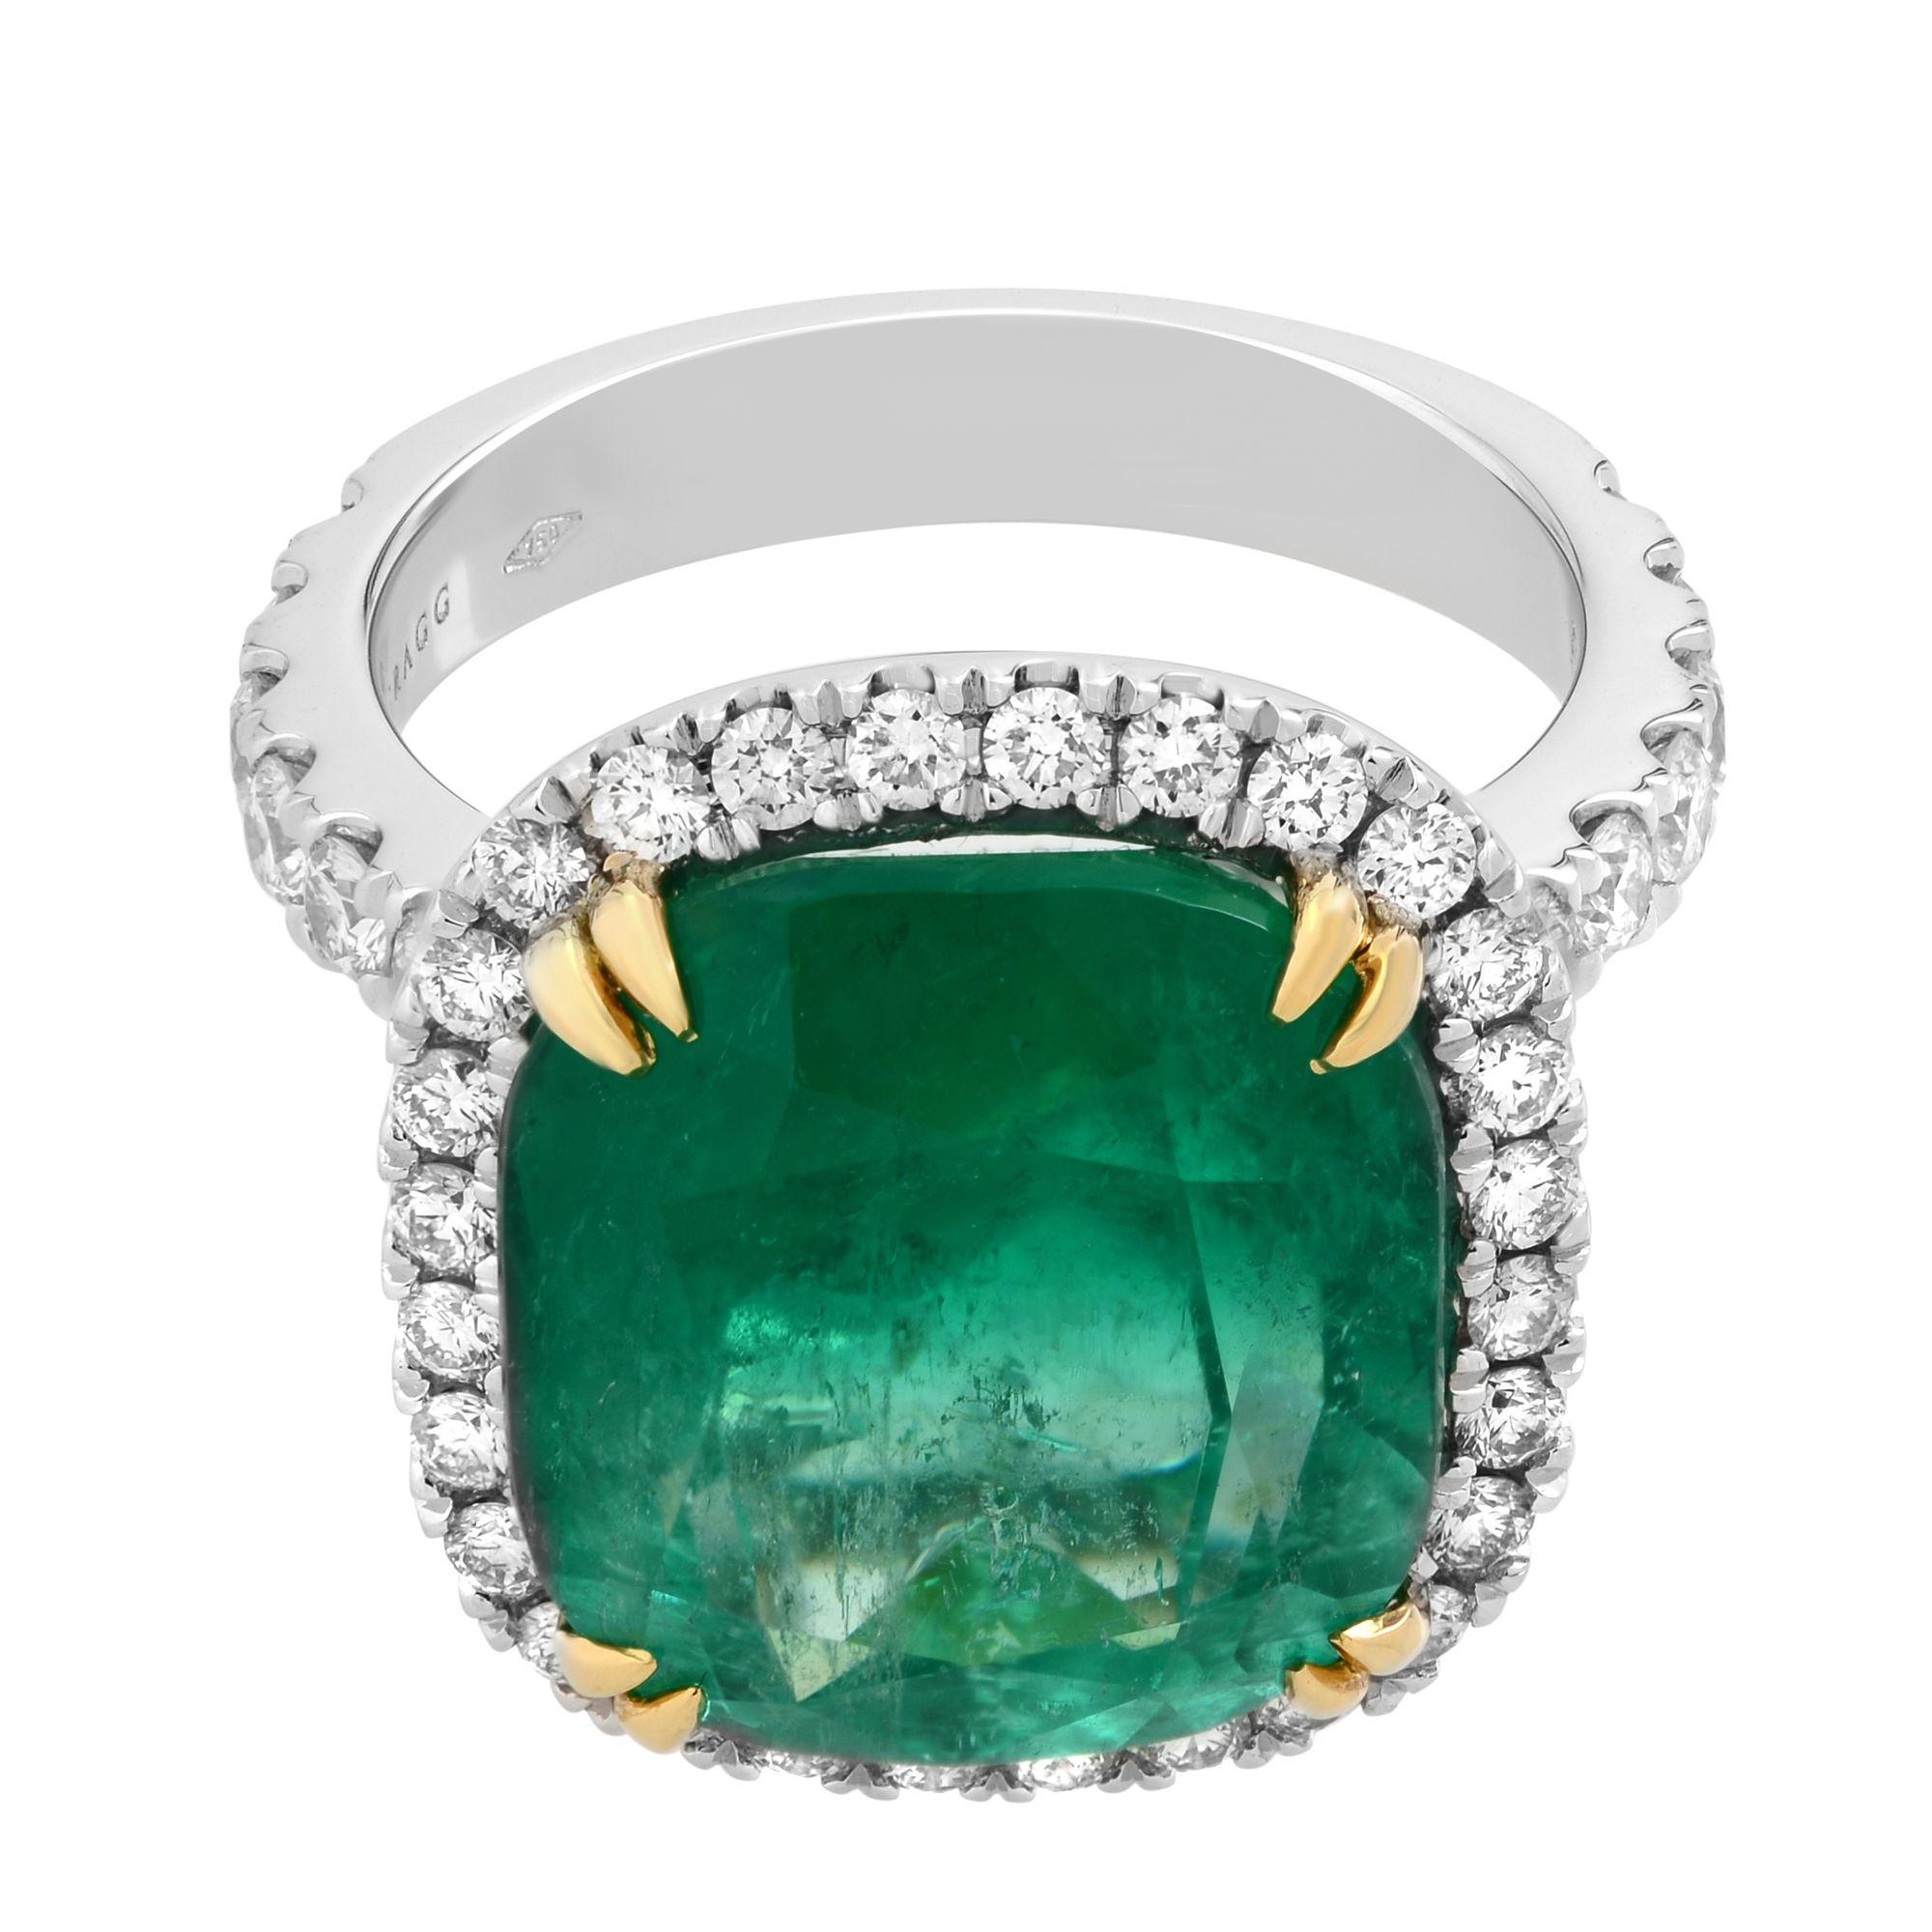 Featuring a gorgeous, rich green 9.23ct genuine Colombian emerald surrounded by a glittering diamond halo. This beautiful emerald has excellent faceting and full of sparkle. Set with yellow gold double claw prongs. Emerald measurements: 13.42 x